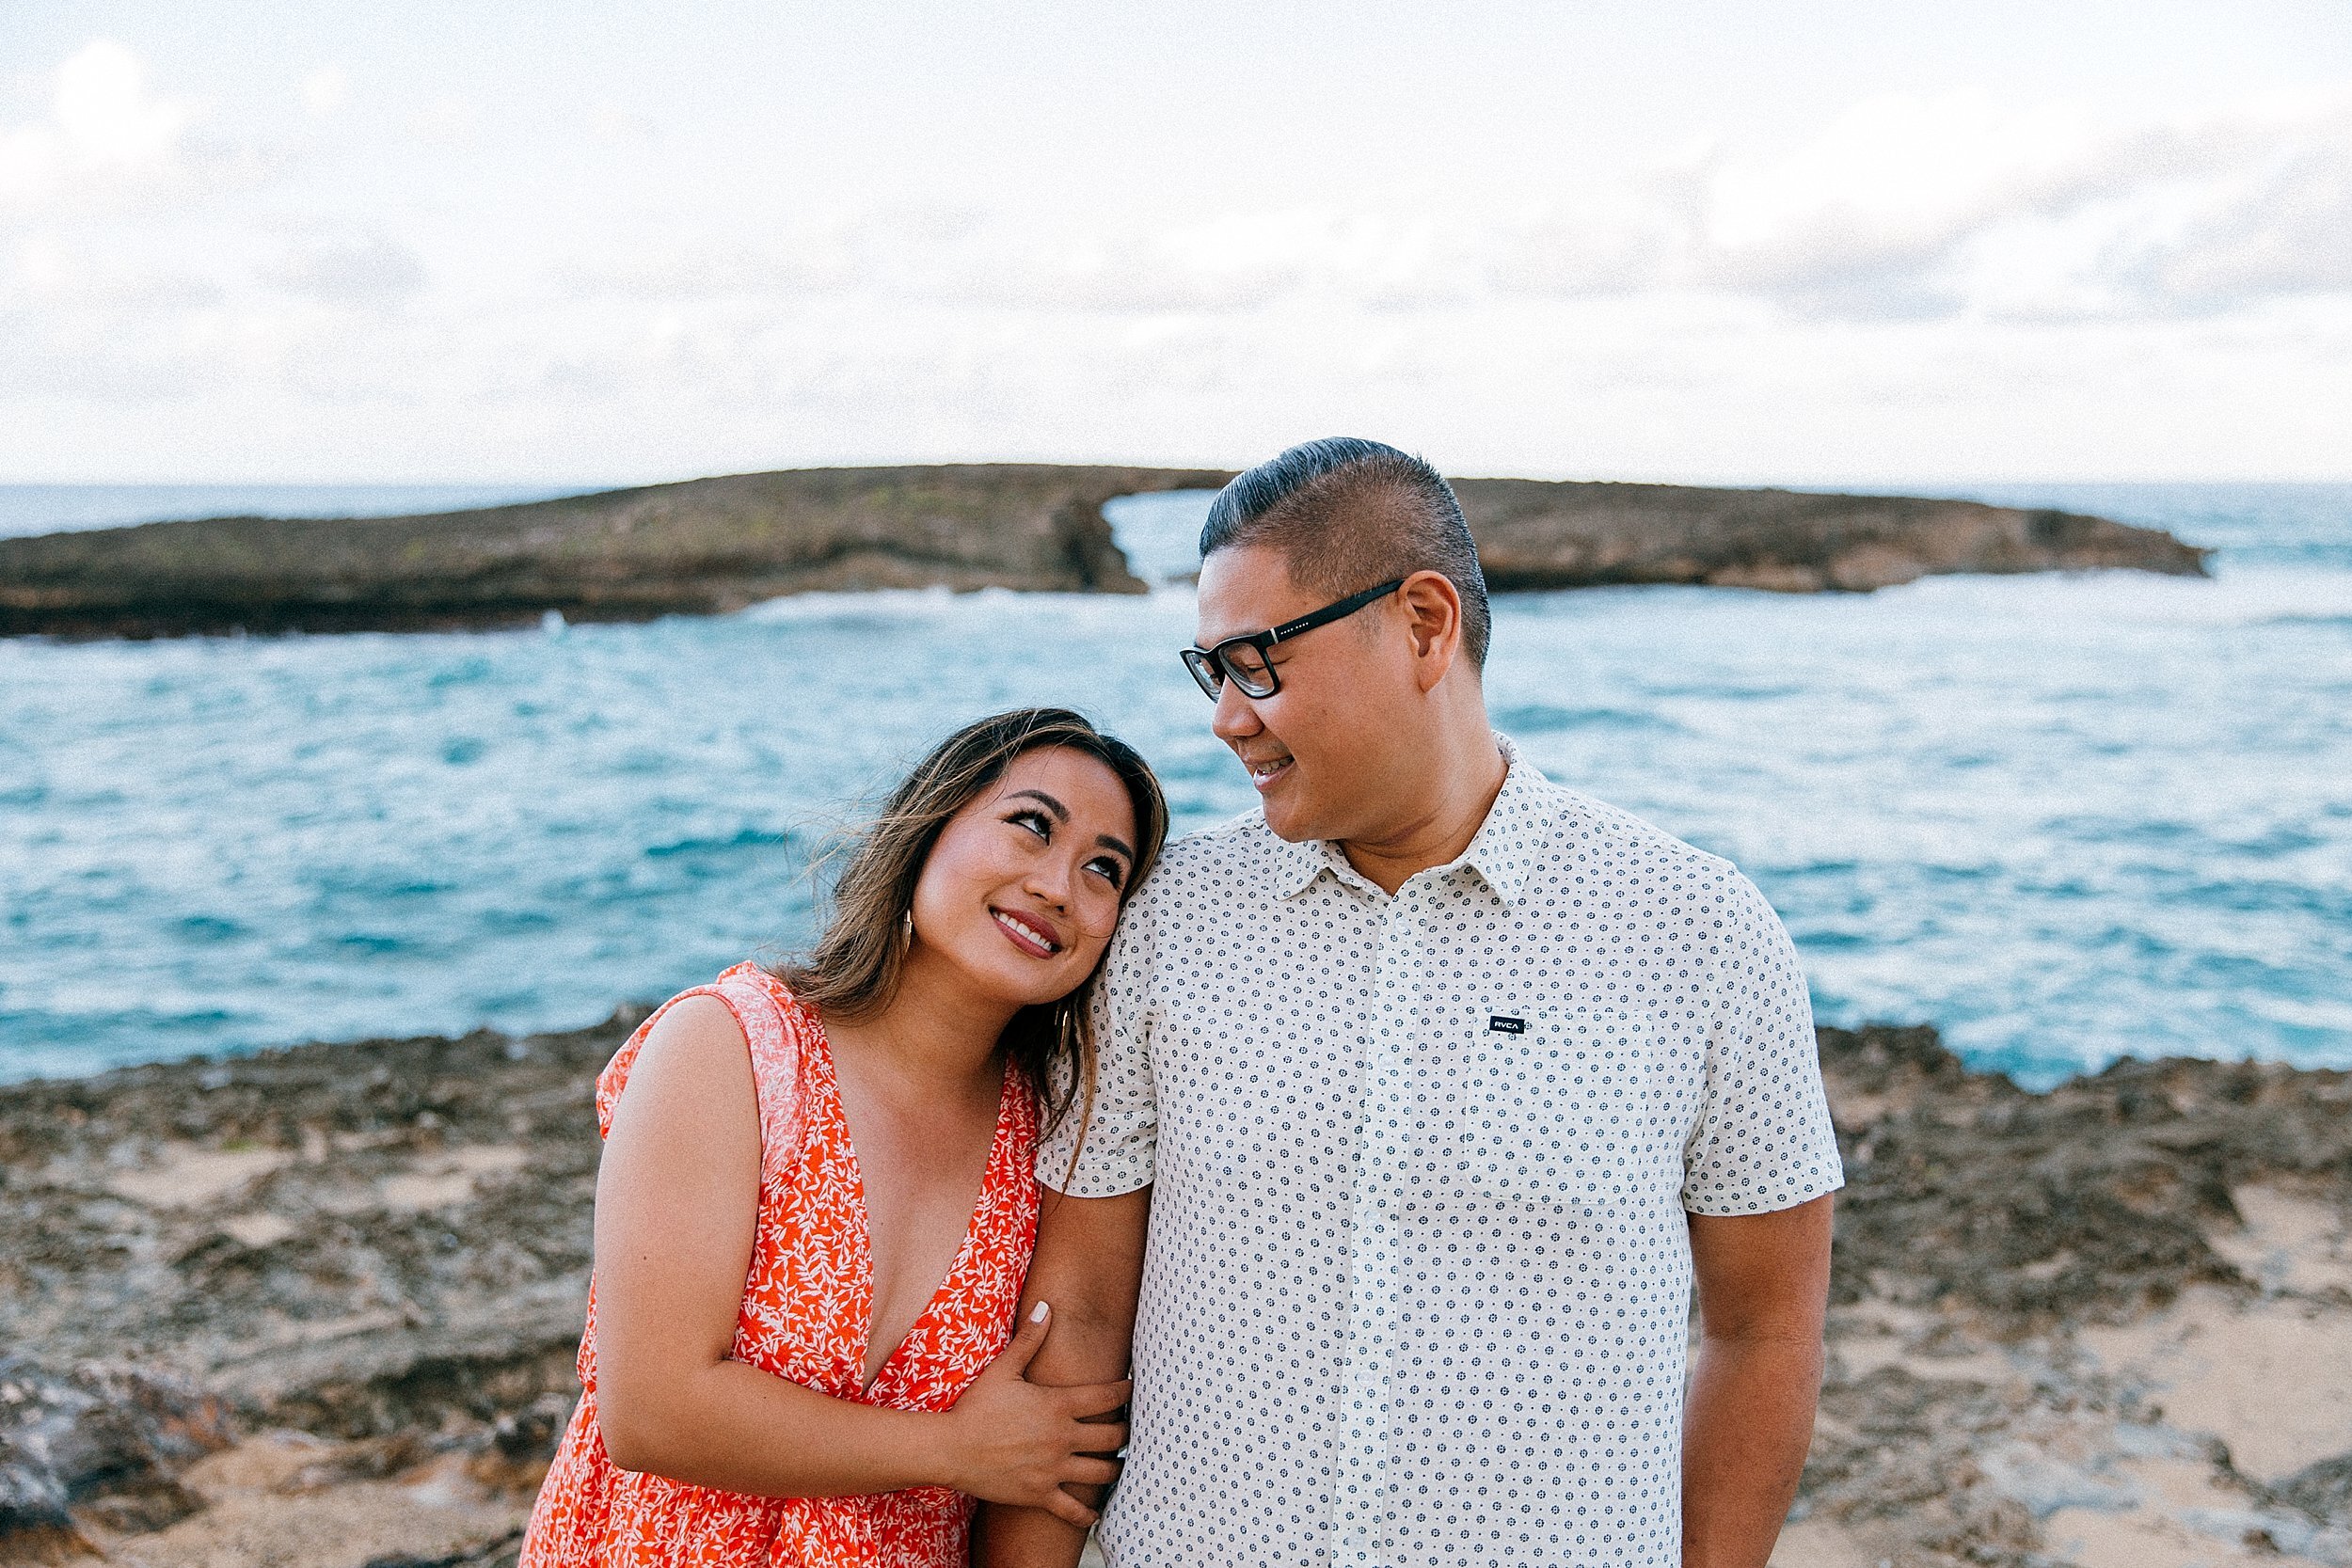 laie-point-cliffside-engagement-session-oahu-hawaii_0002.jpg